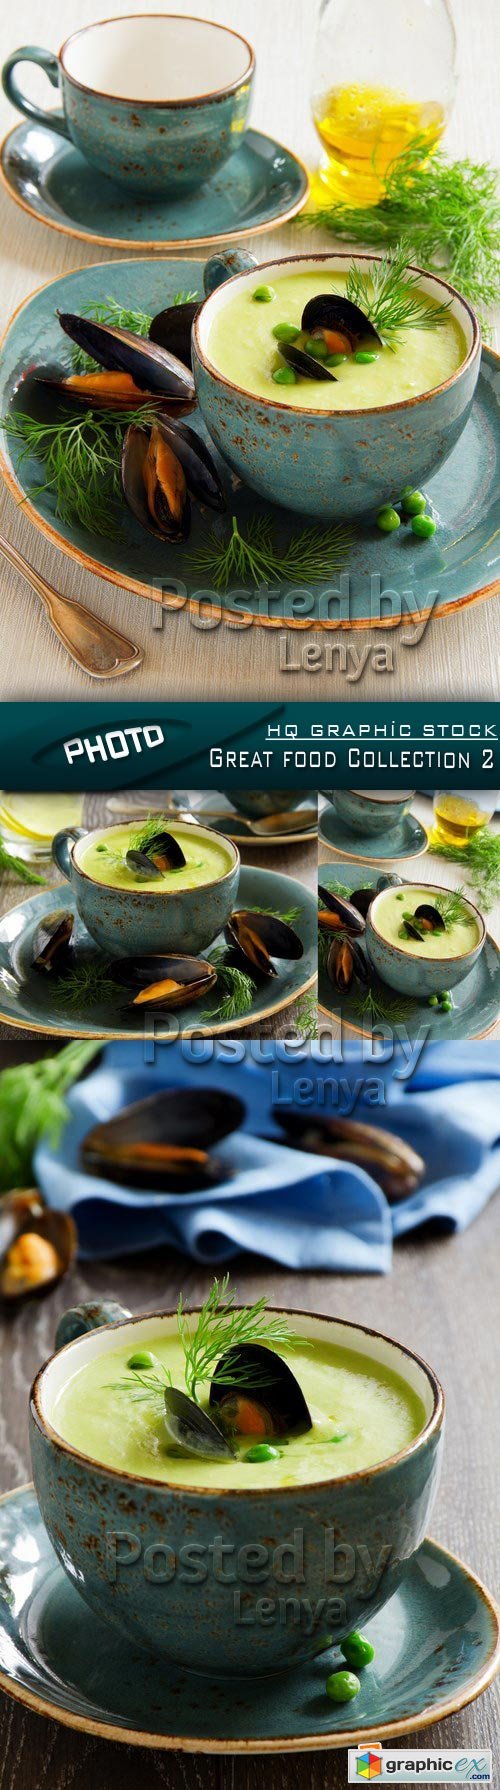 Stock Photo - Great food Collection 2